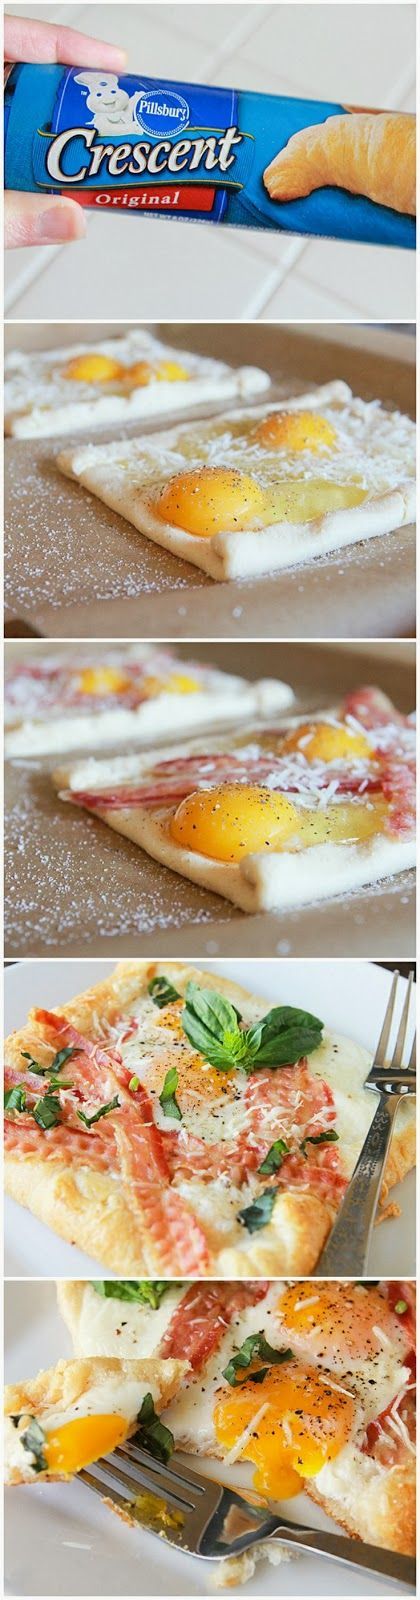 How To Bacon And Egg Crescent